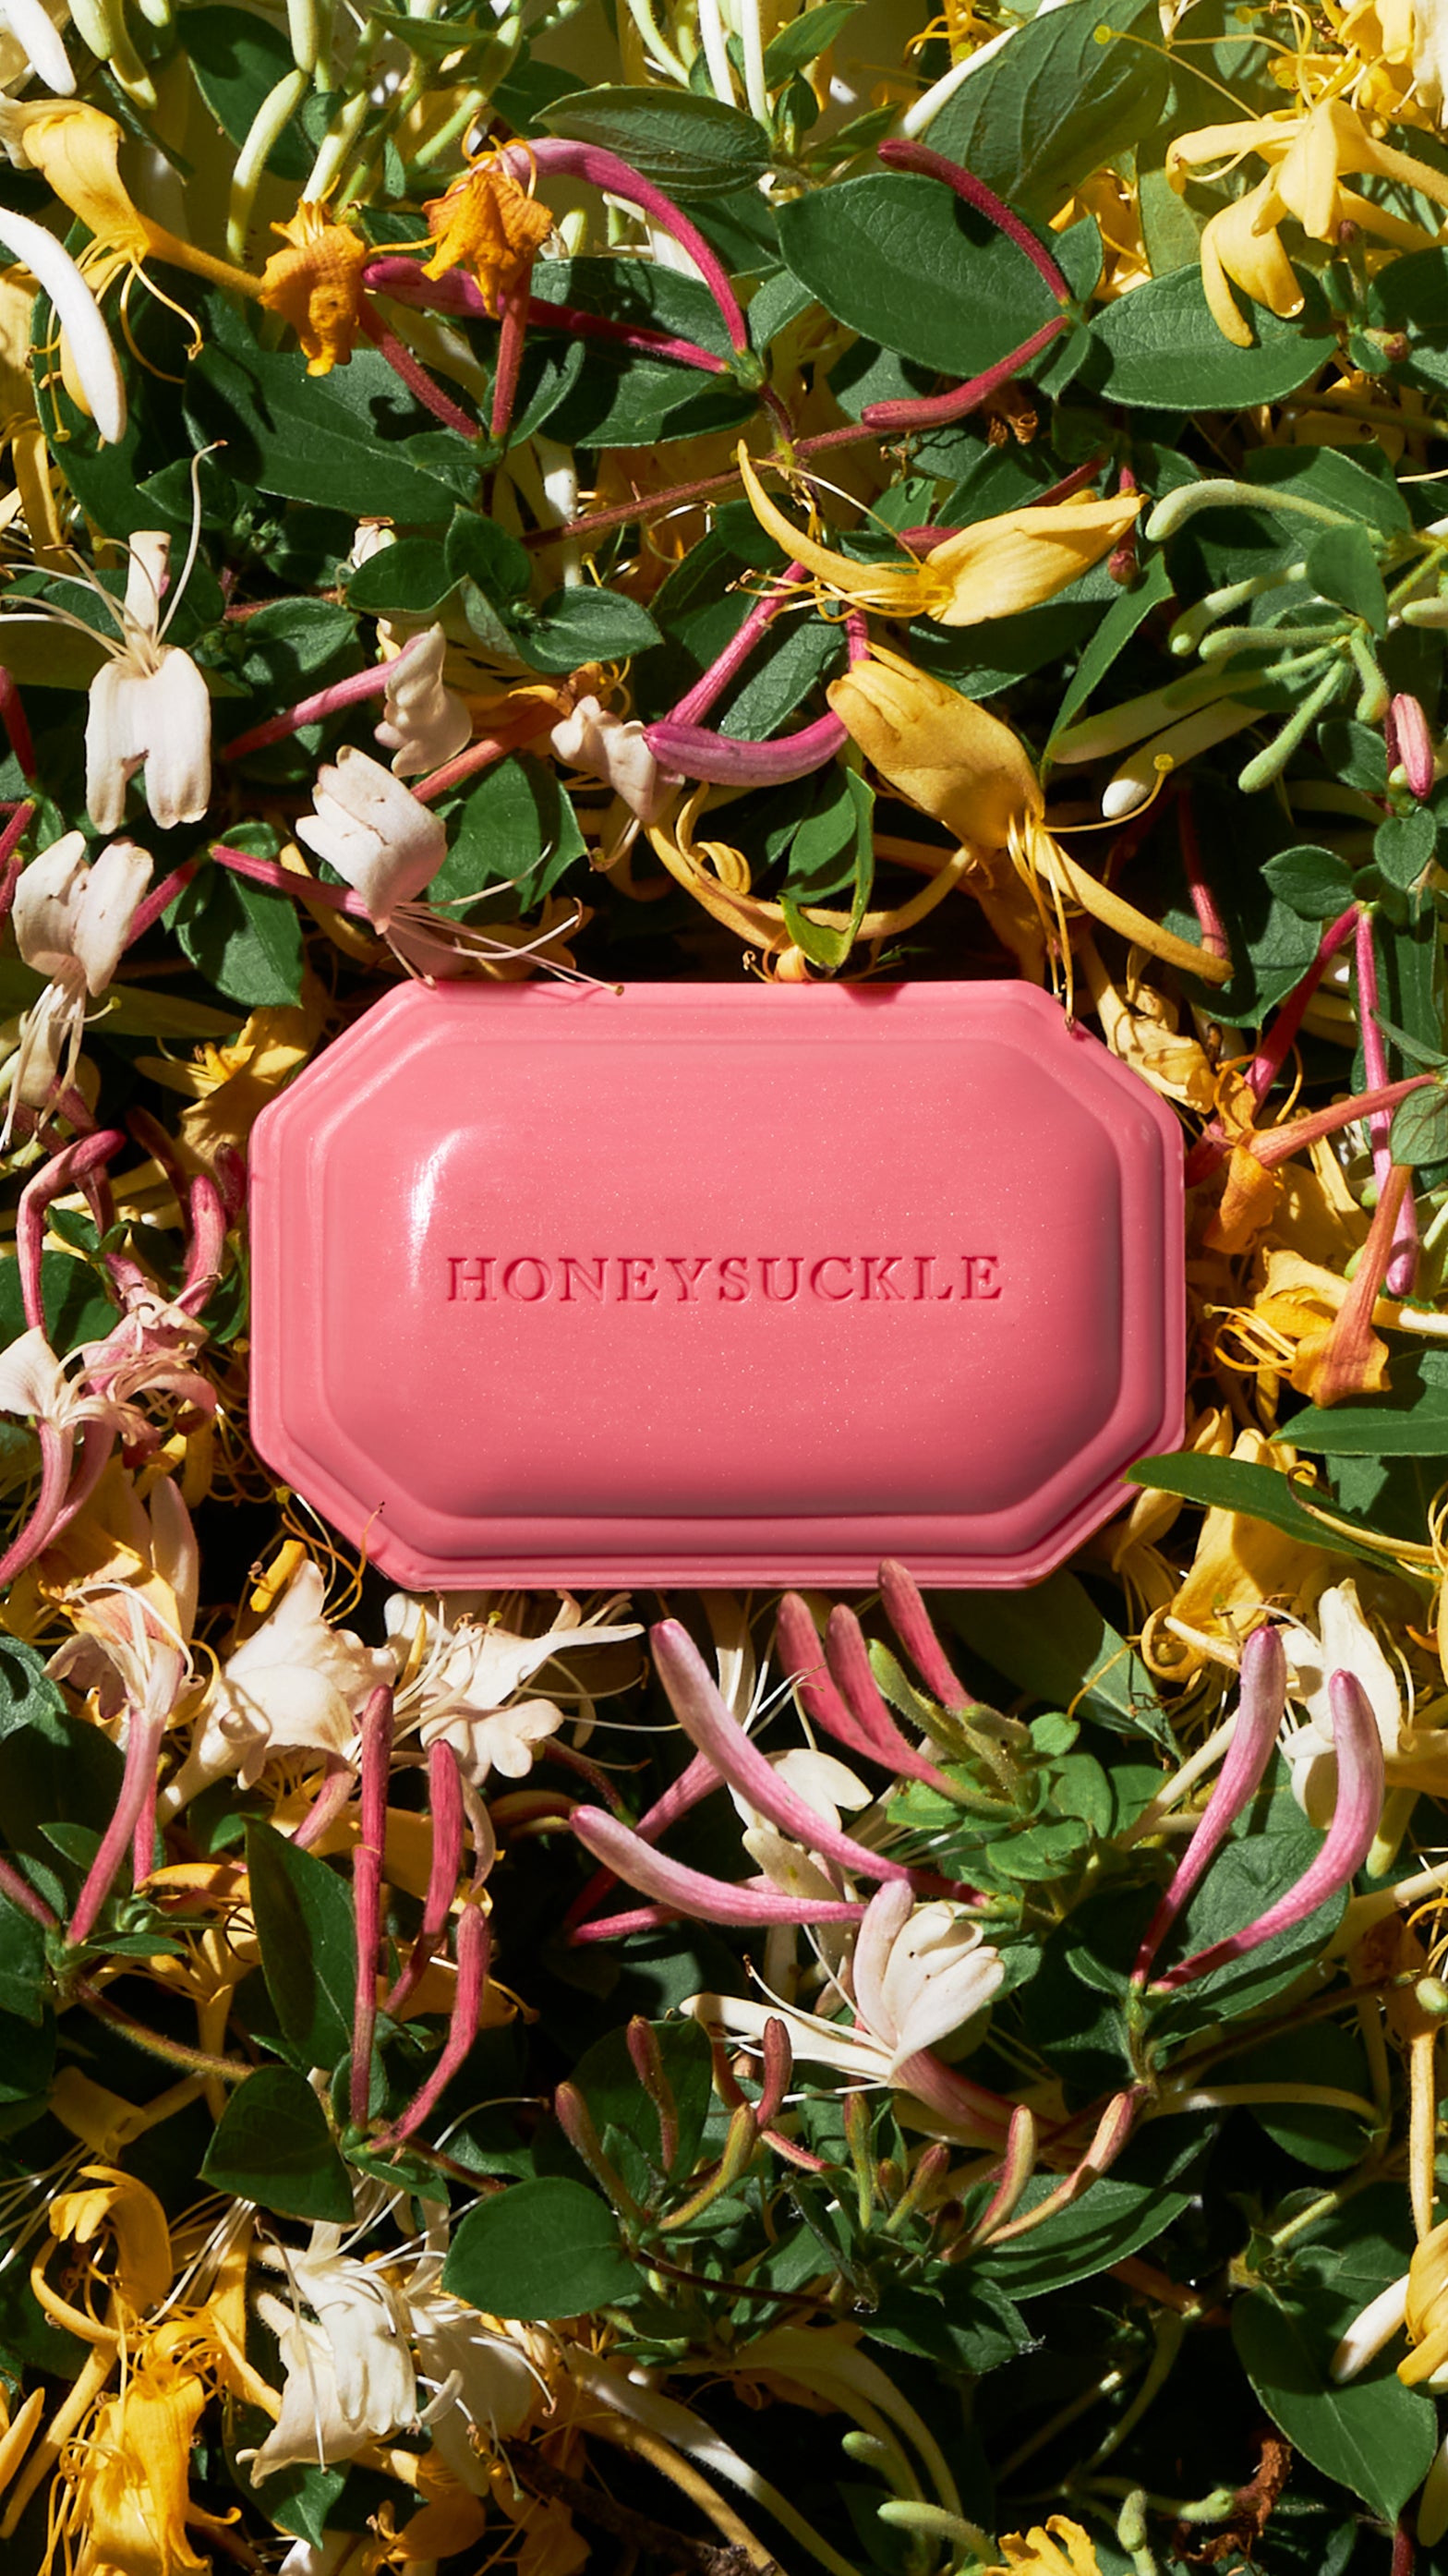 Honeysuckle floral bath soap sitting atop a bed of wild honeysuckle flowers, made by Caswell-Massey in collaboration with NYBG